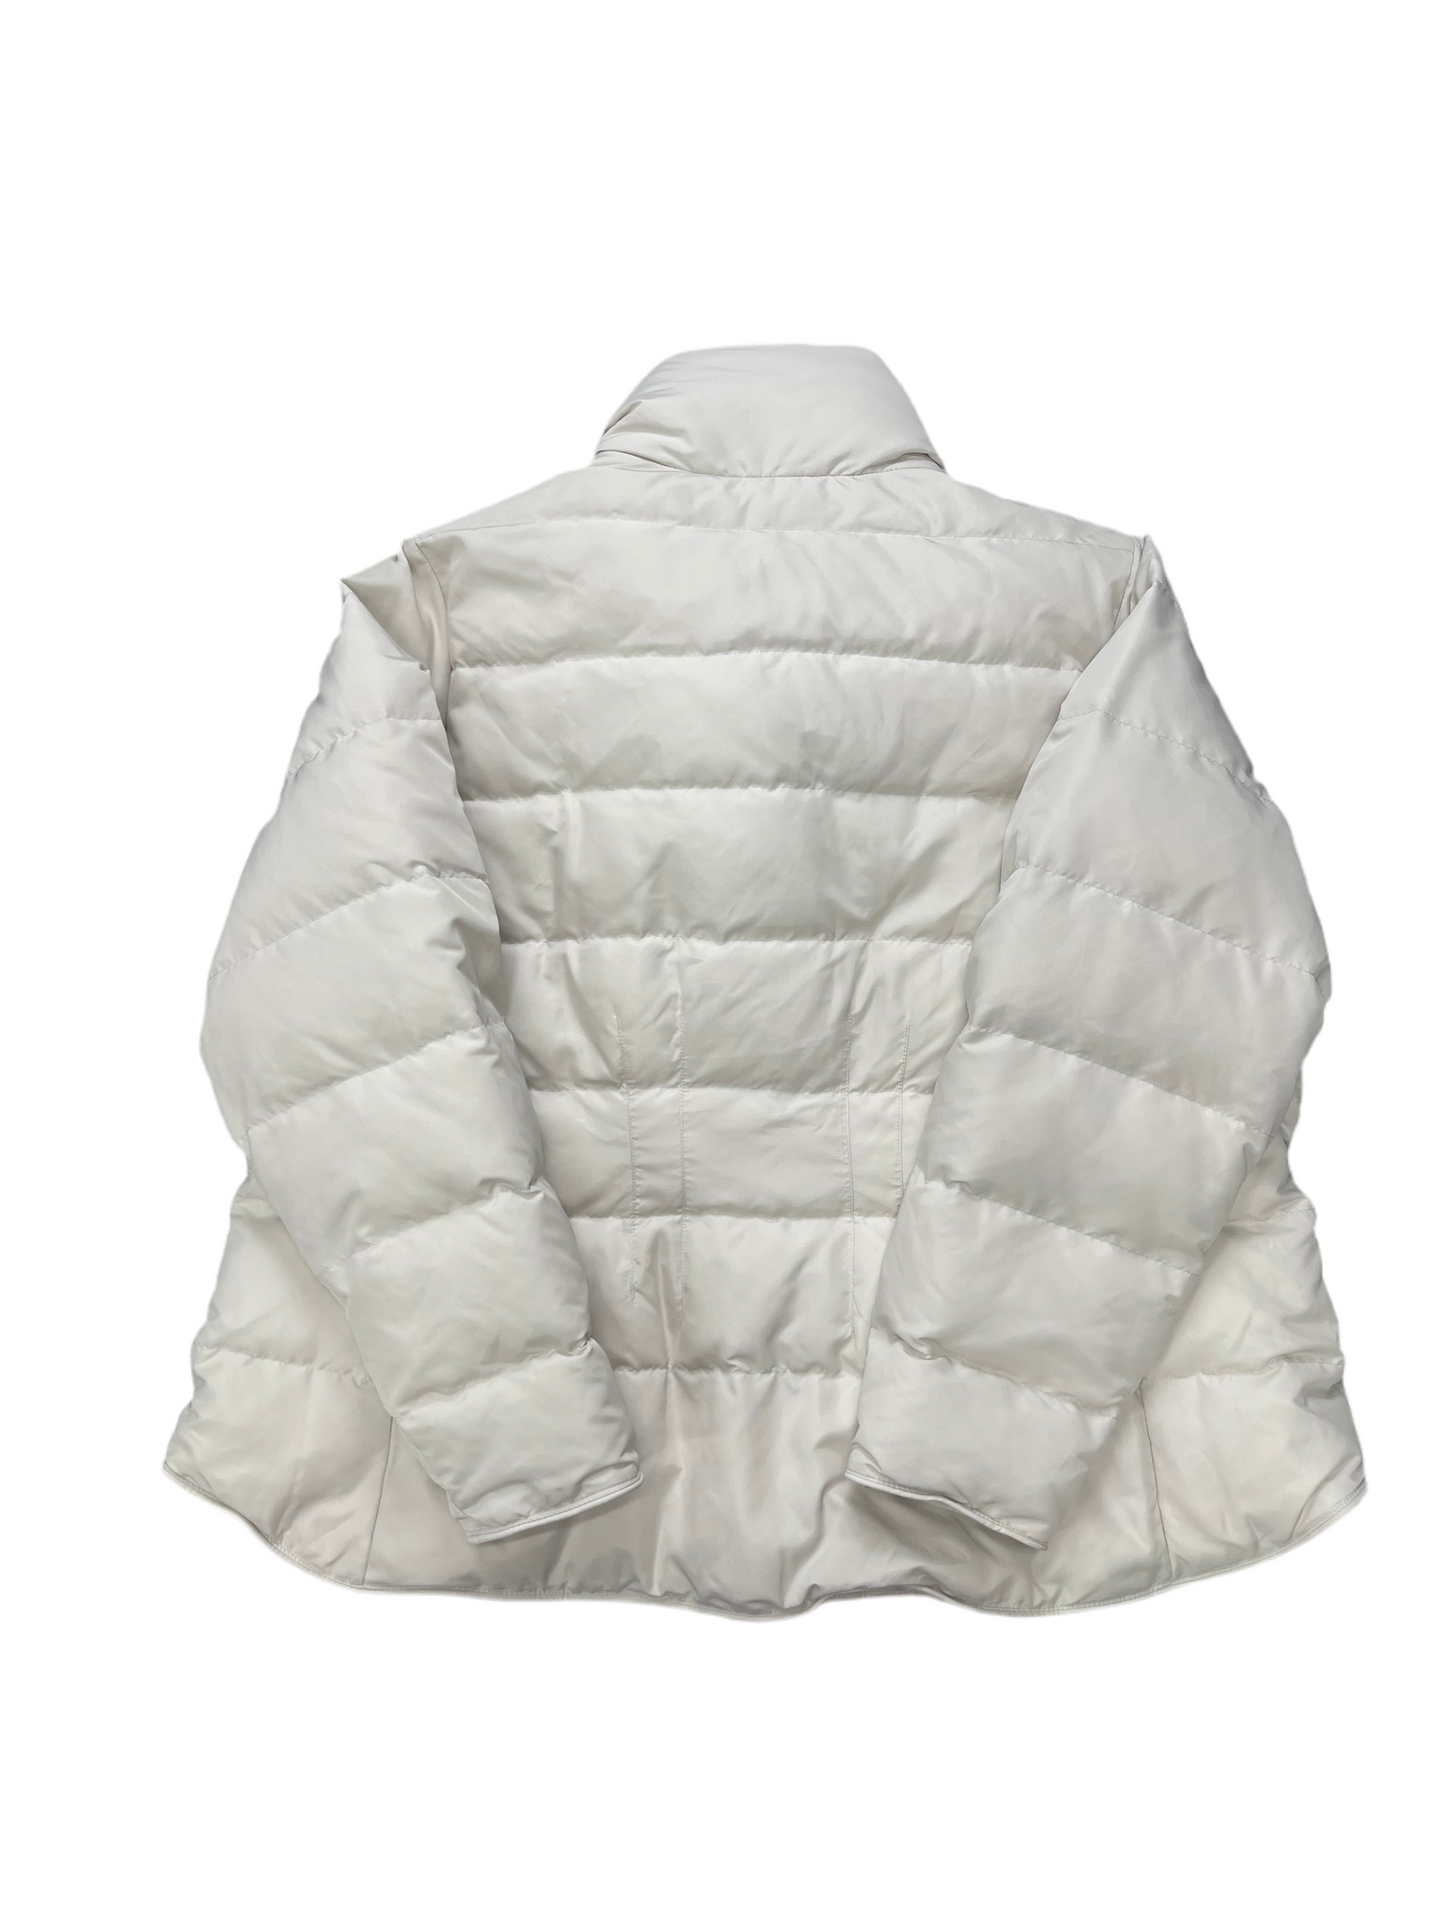 Cream Coat Puffer & Quilted Lane Bryant, Size 3x